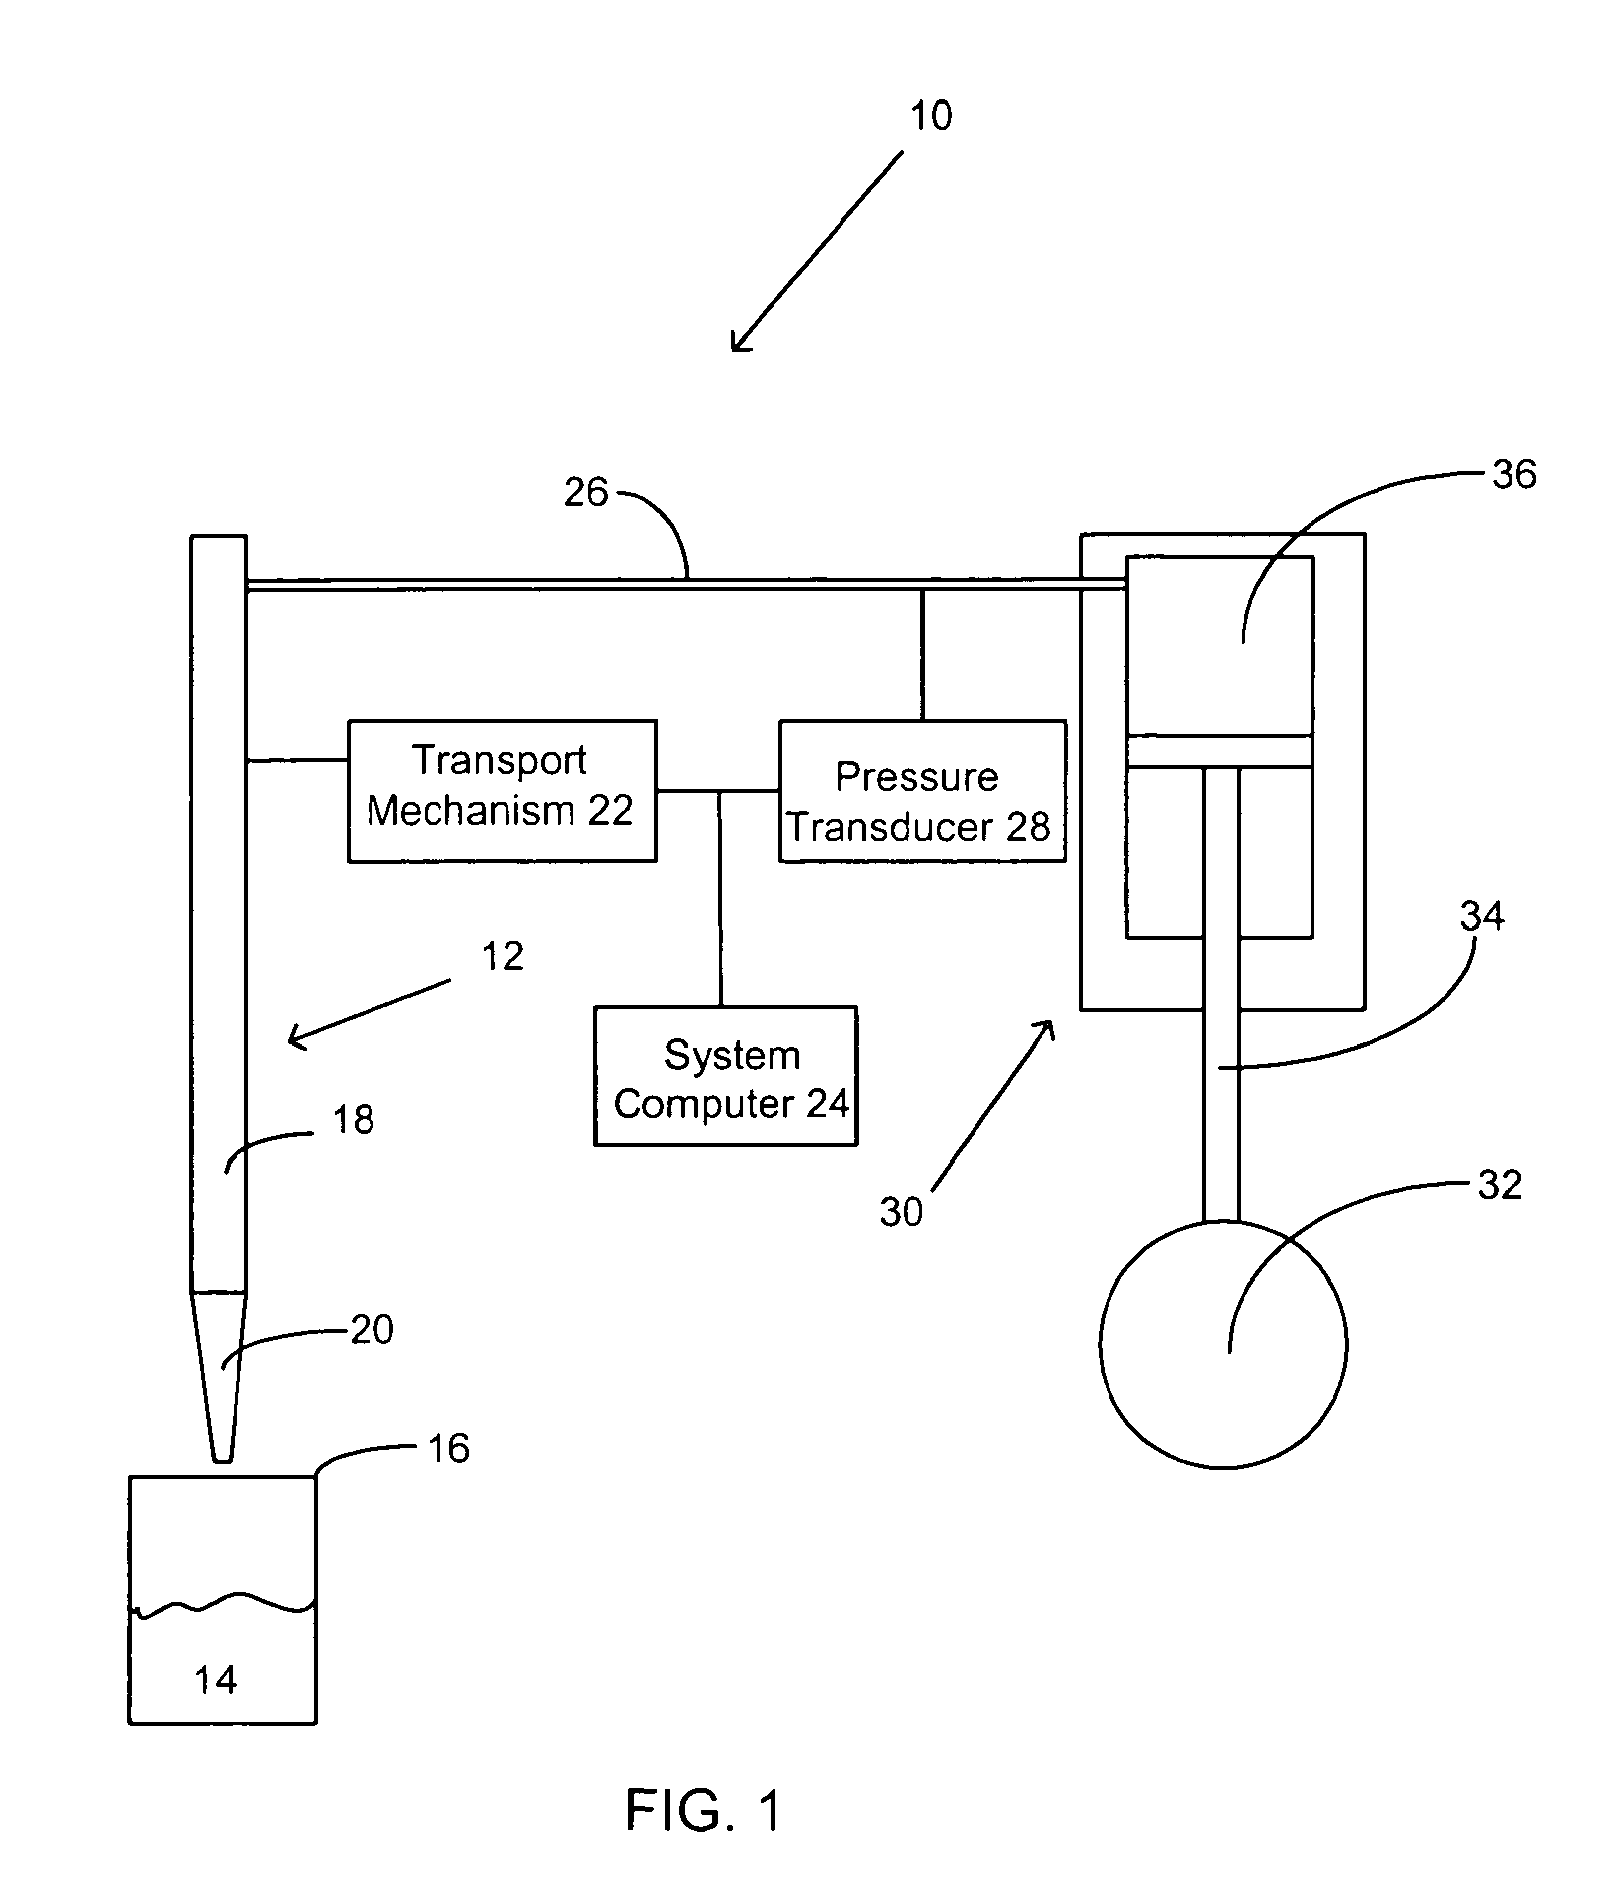 Method for ascertaining interferants in small liquid samples in an automated clinical analyzer